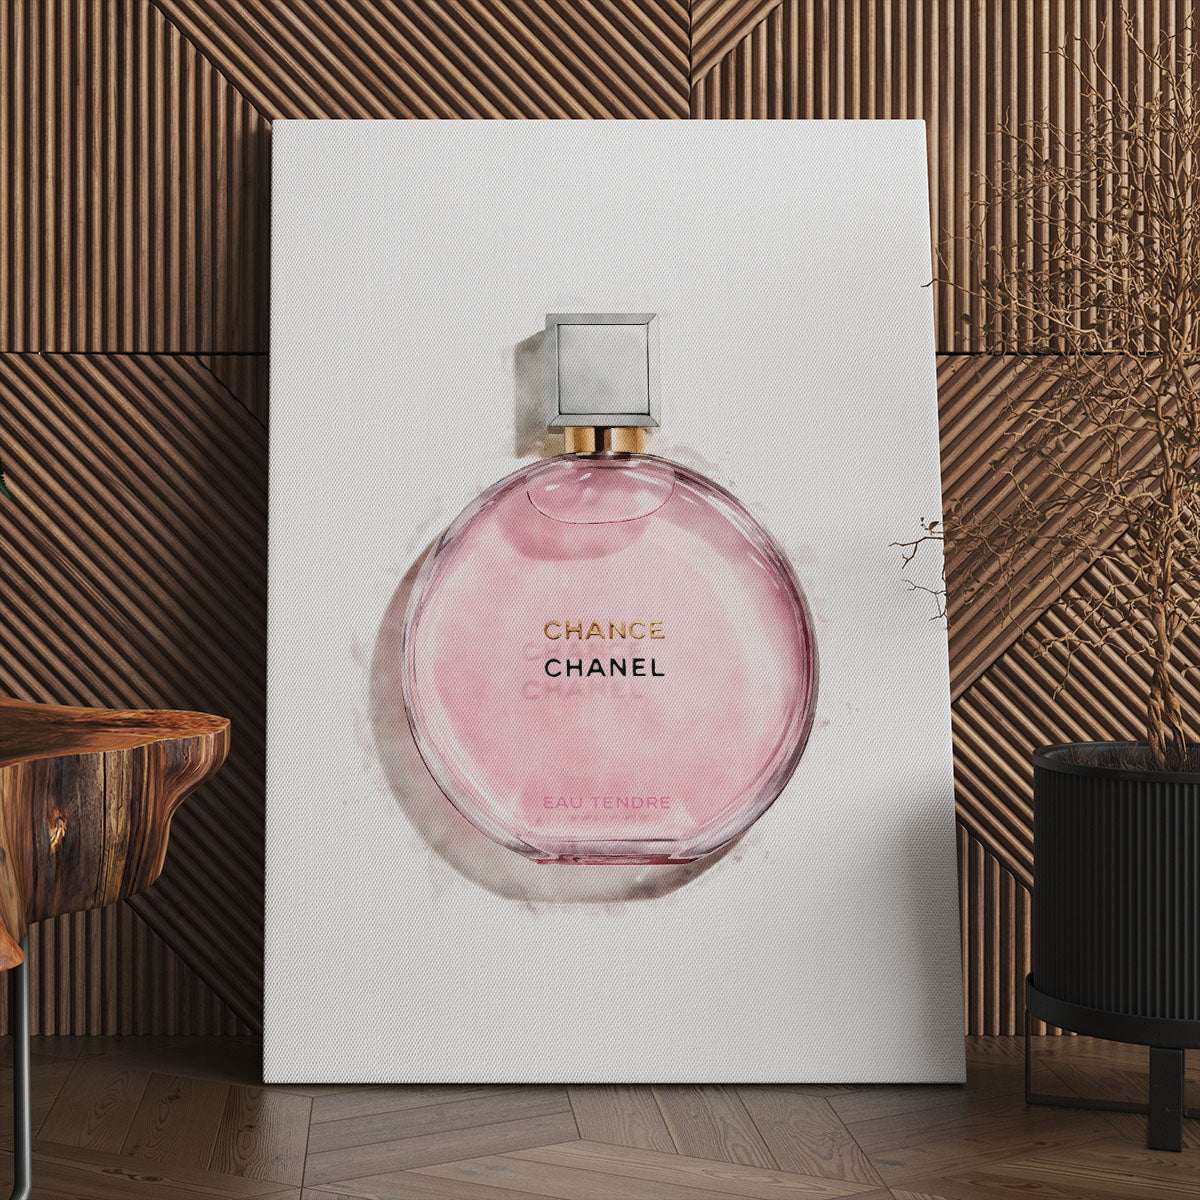 chanel perfume offers